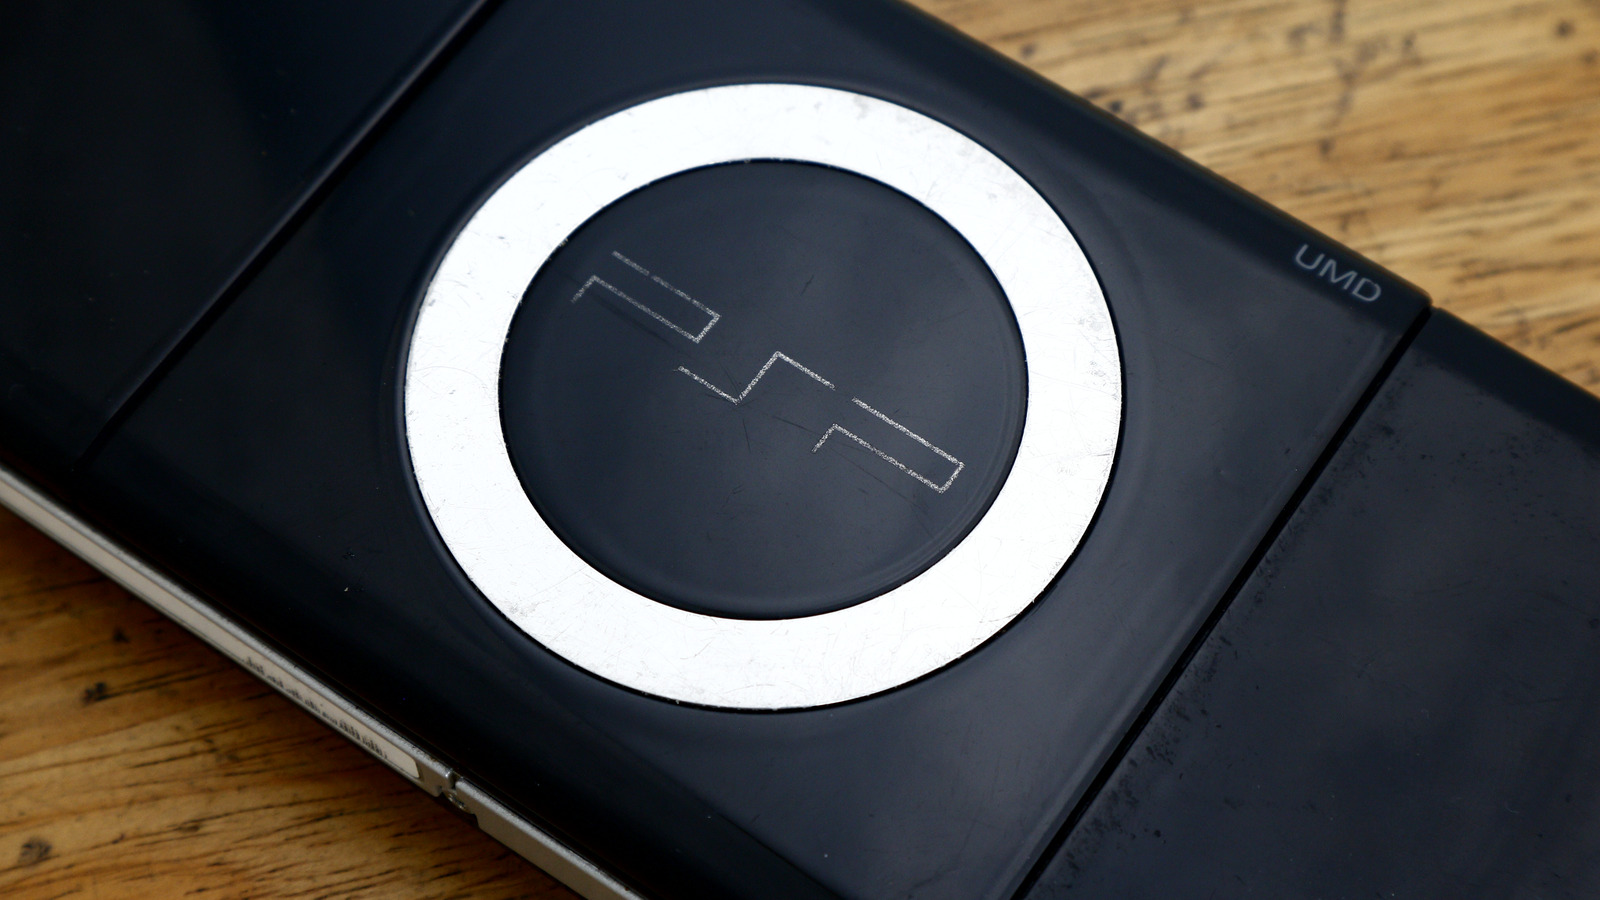 After 10 Years, Sony Discontinues PSP -- What's Your Favorite Memory? -  GameSpot